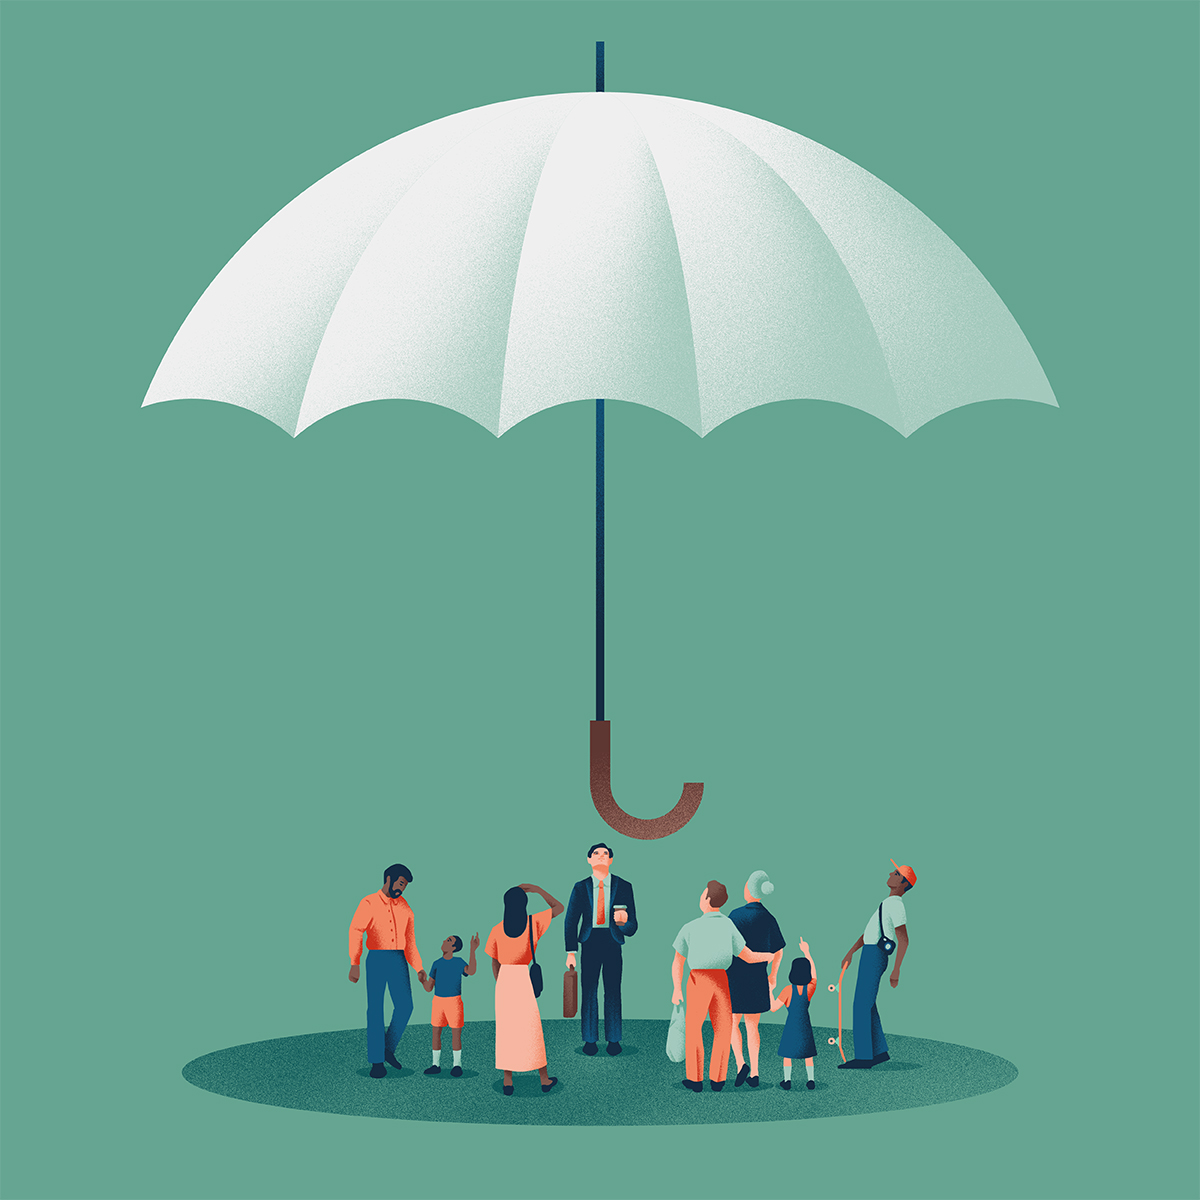 Illustration of a group of diverse people being covered by a very large umbrella